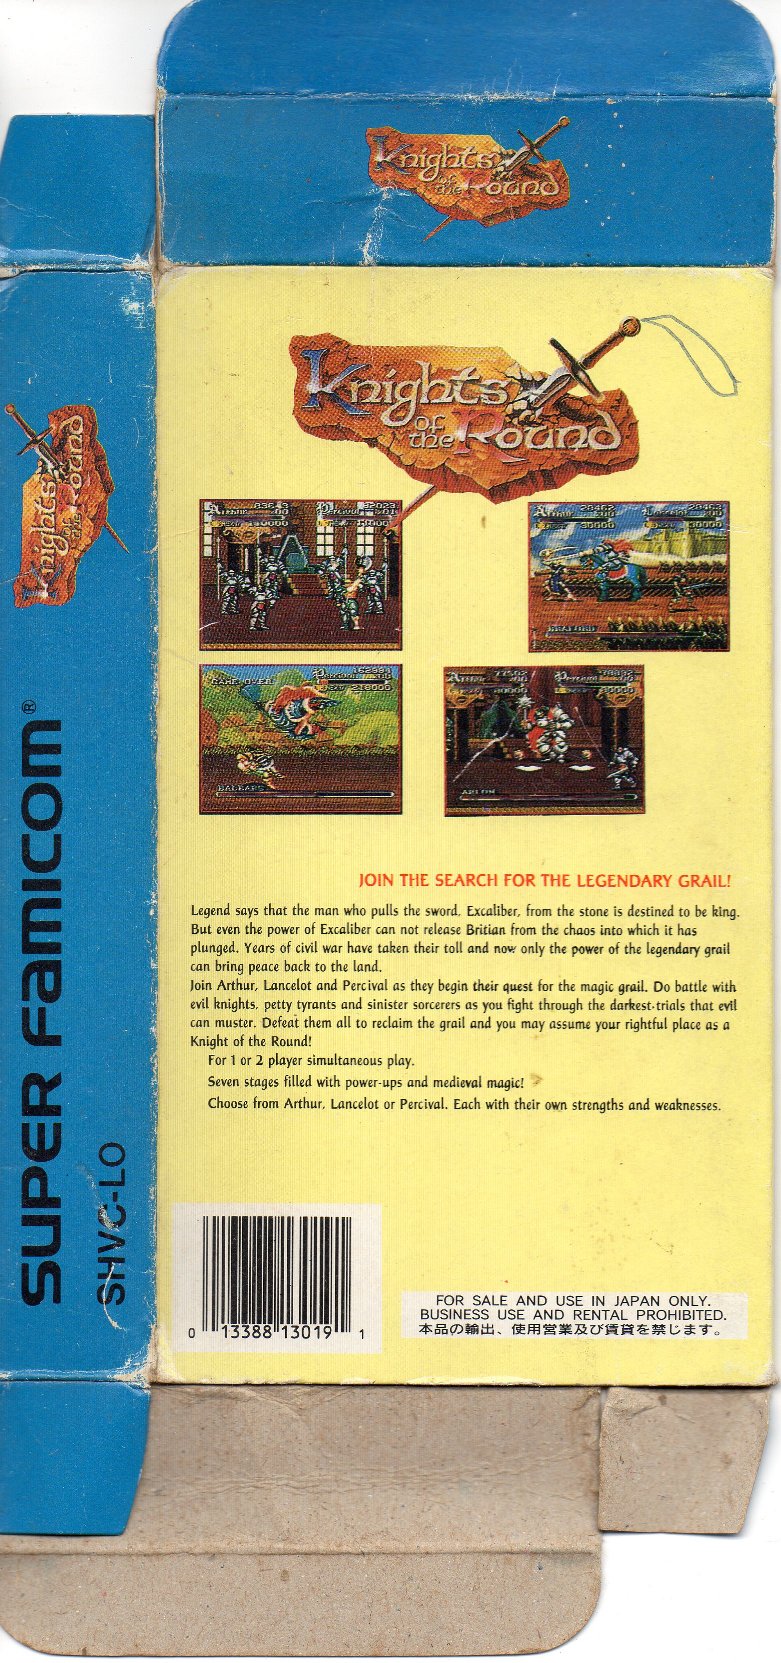 Large scan of the box (back)